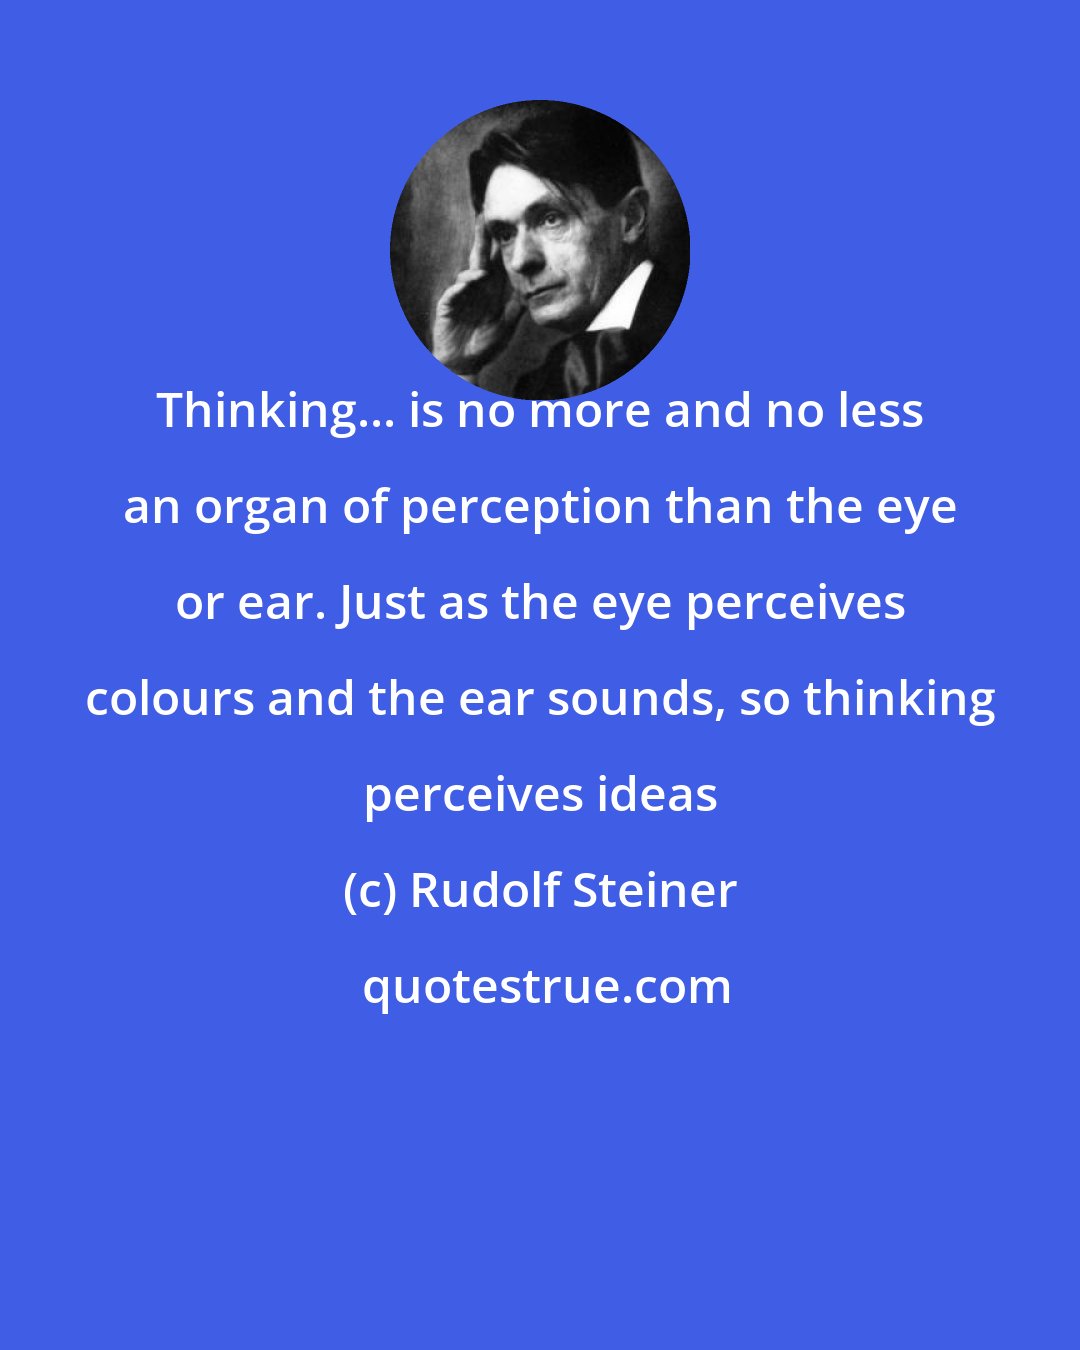 Rudolf Steiner: Thinking... is no more and no less an organ of perception than the eye or ear. Just as the eye perceives colours and the ear sounds, so thinking perceives ideas